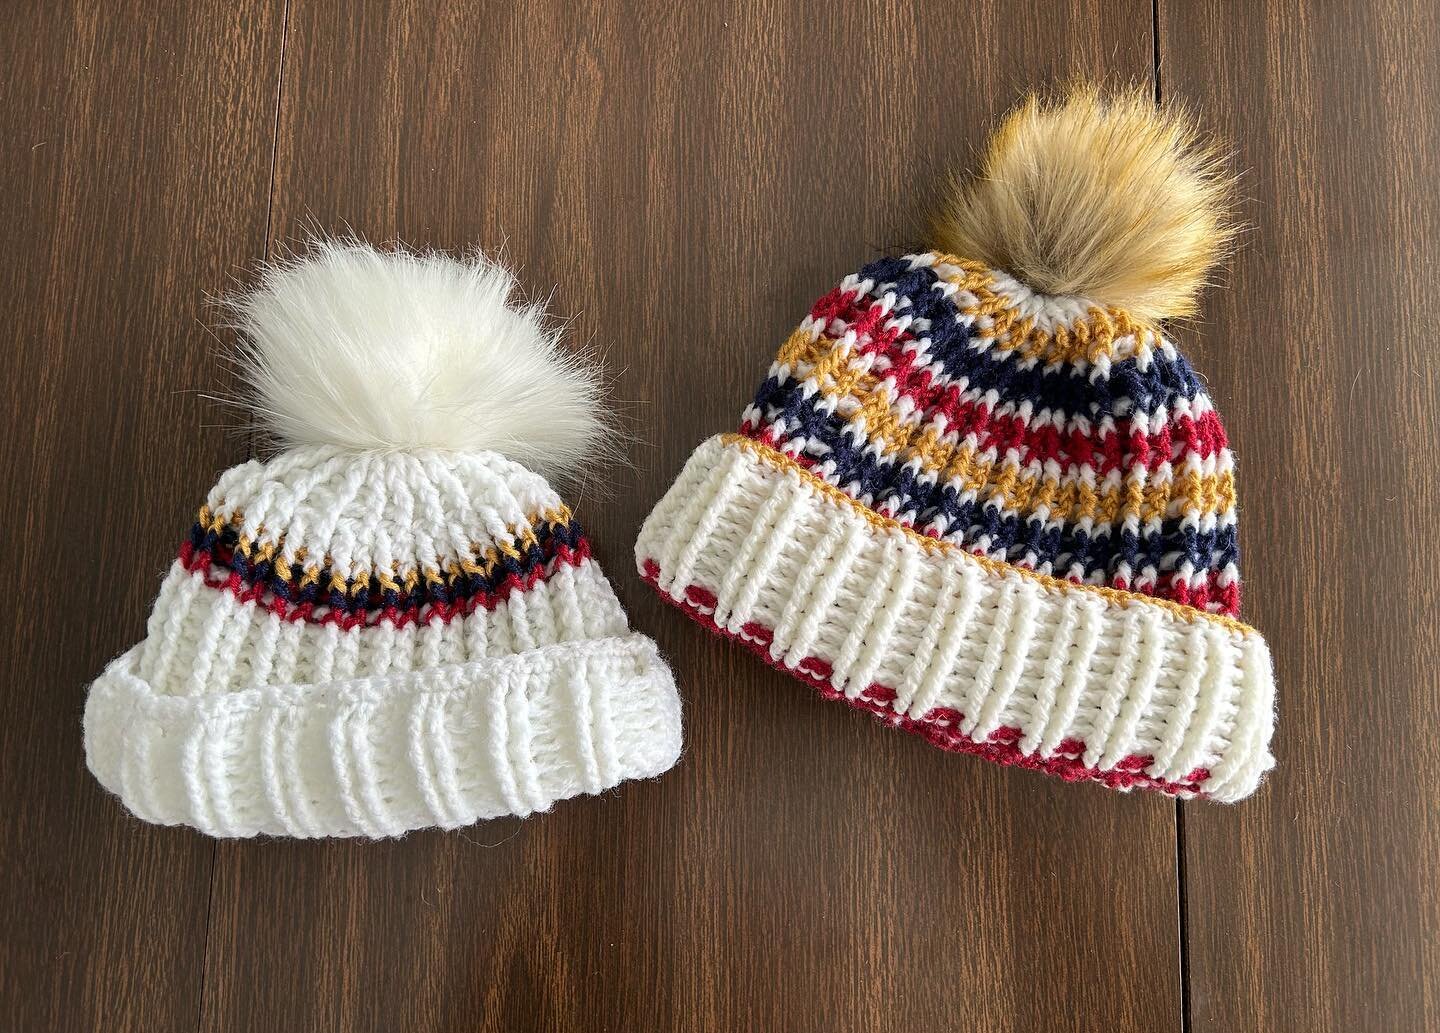 Couple of hats I recently wrapped up for @shannonthetravelingchef&rsquo;s grand-baby, Carter ✨One for now and one for him to grow into, both to celebrate his Colombian heritage 🇨🇴